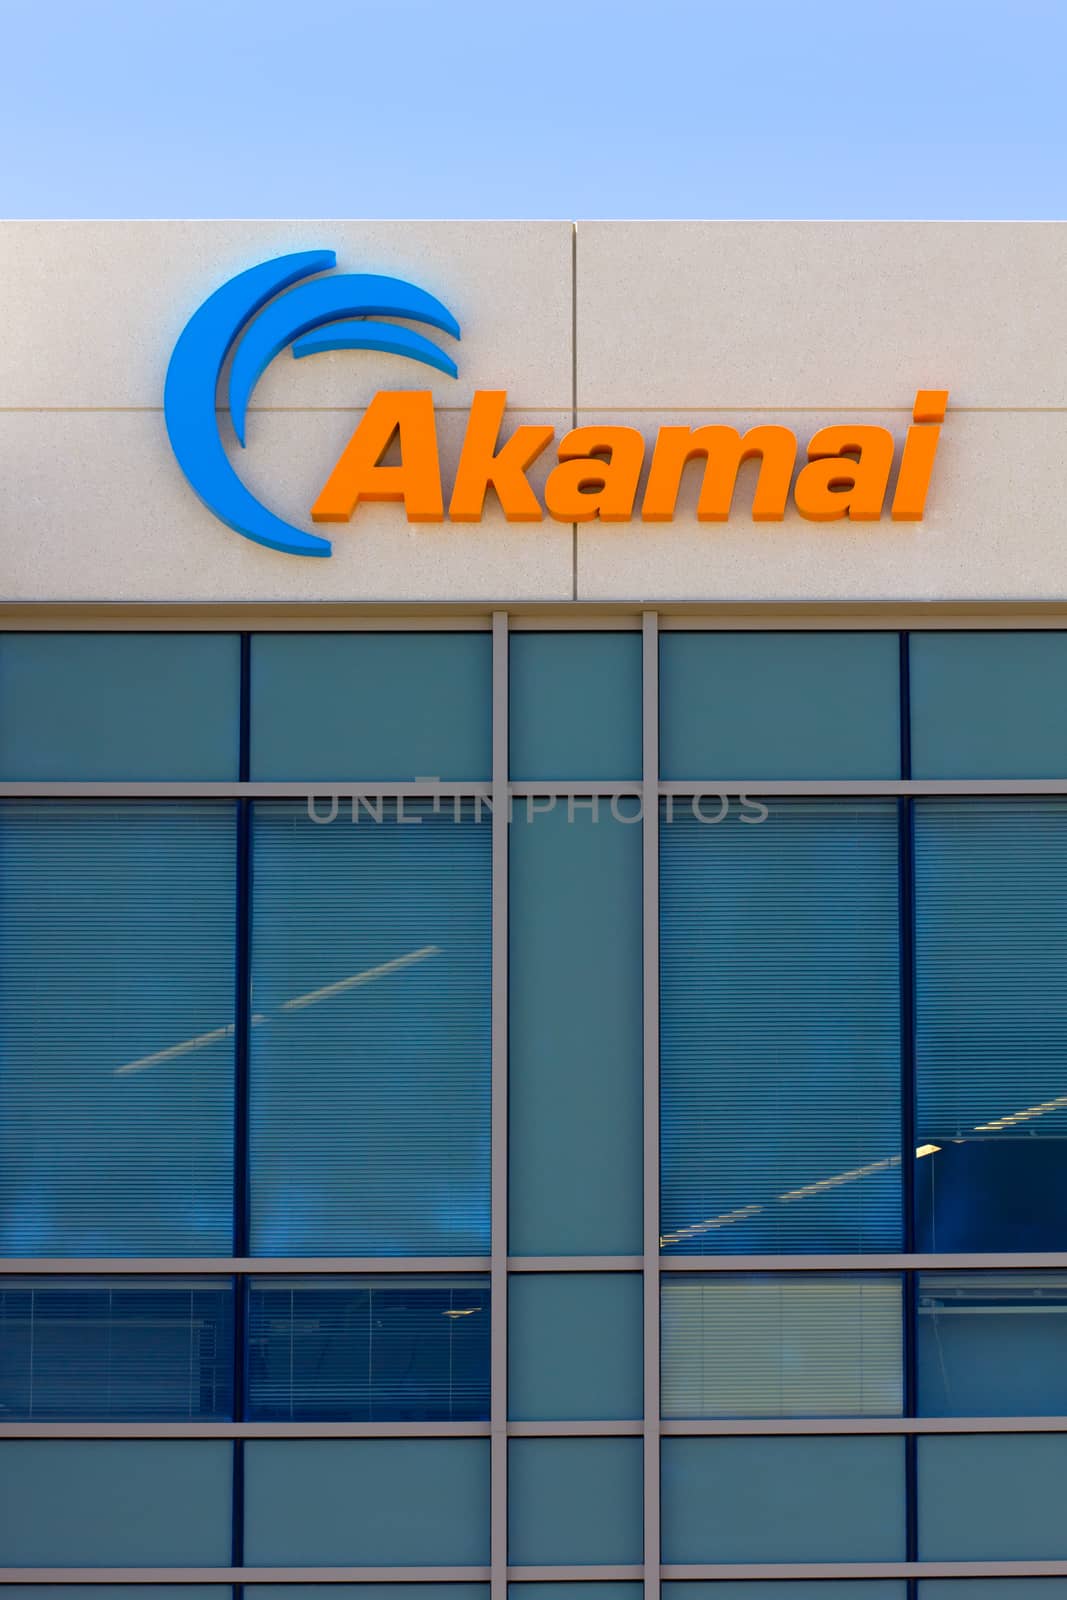 Akamai building in Silicon Valley by wolterk